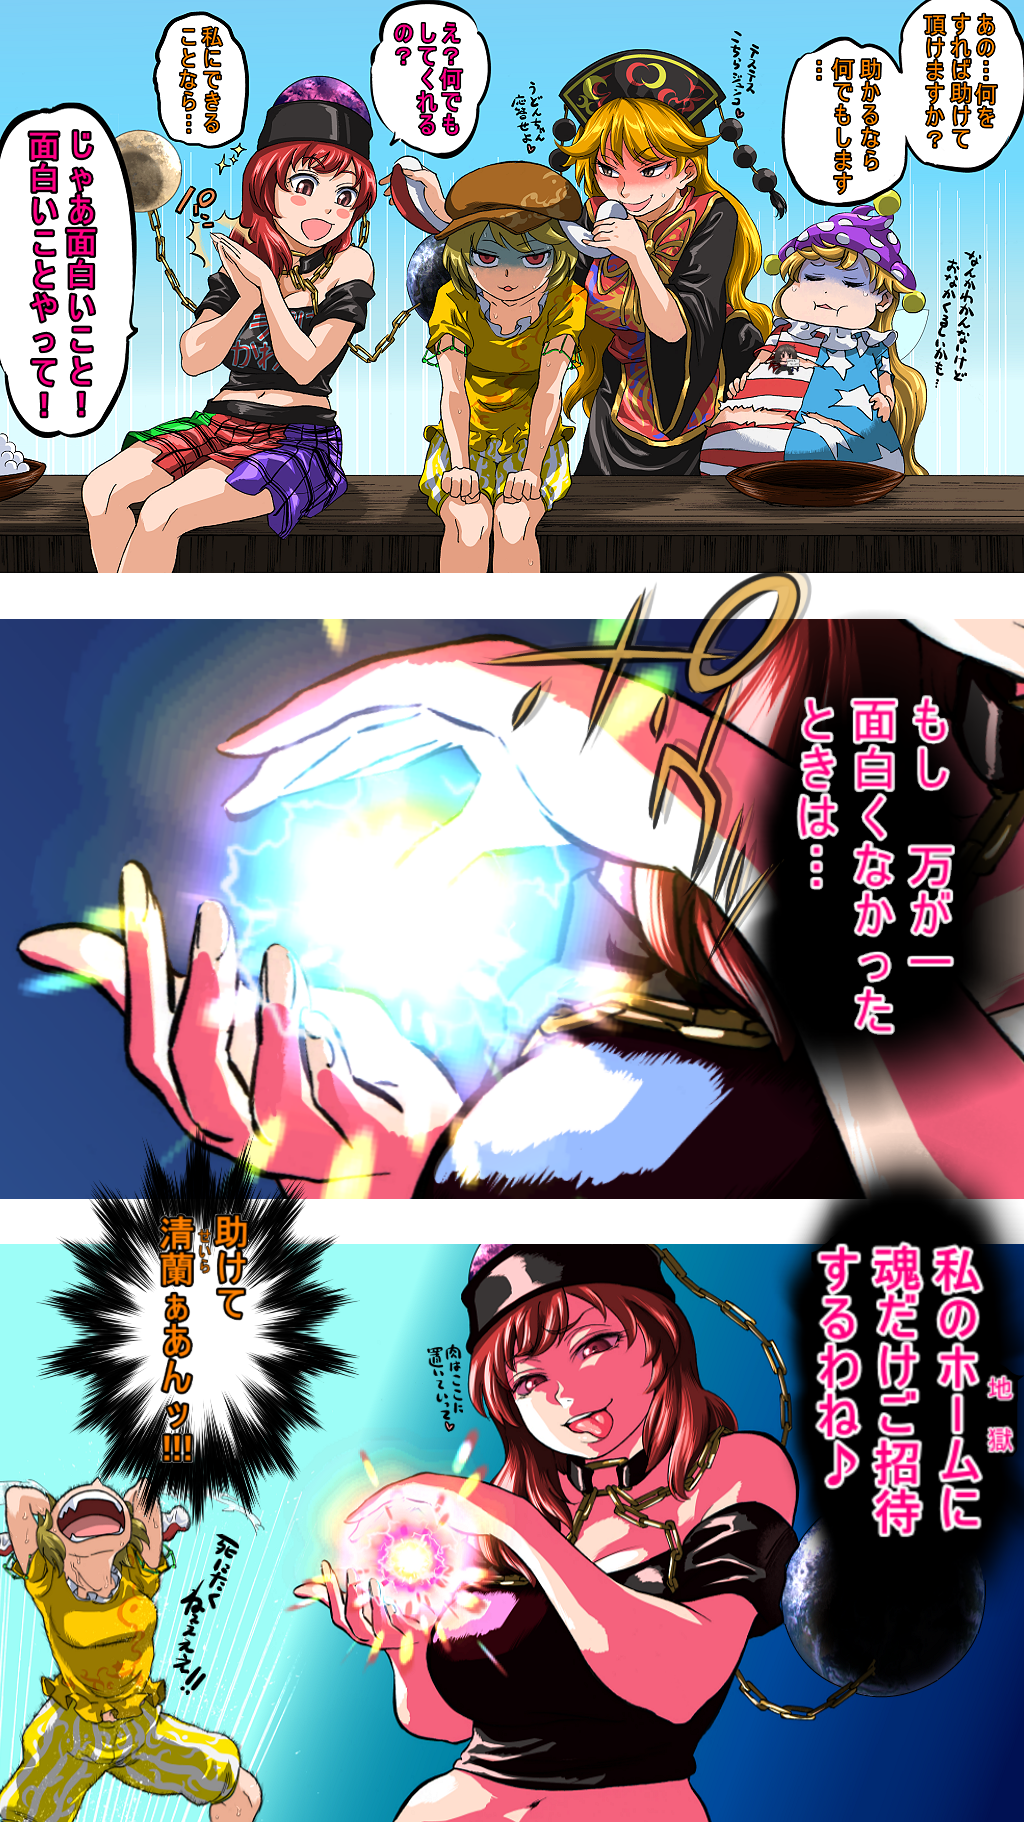 3koma 4girls american_flag_dress animal_ears bare_shoulders black_dress black_shirt blonde_hair brown_eyes can't_show_this chains chinese_clothes clothes_writing clownpiece collar comic commentary_request crop_top dress fat flat_cap hat hecatia_lapislazuli highres houjuu_nue jester_cap junko_(touhou) looking_at_viewer midriff miniskirt multicolored multicolored_clothes multicolored_skirt multiple_girls navel off-shoulder_shirt open_mouth plump polka_dot polos_crown rabbit_ears red_eyes redhead ringo_(touhou) shirt short_sleeves shorts shundou_heishirou sitting skirt star star_print striped t-shirt tabard teeth tongue tongue_out touhou translation_request yellow_shirt